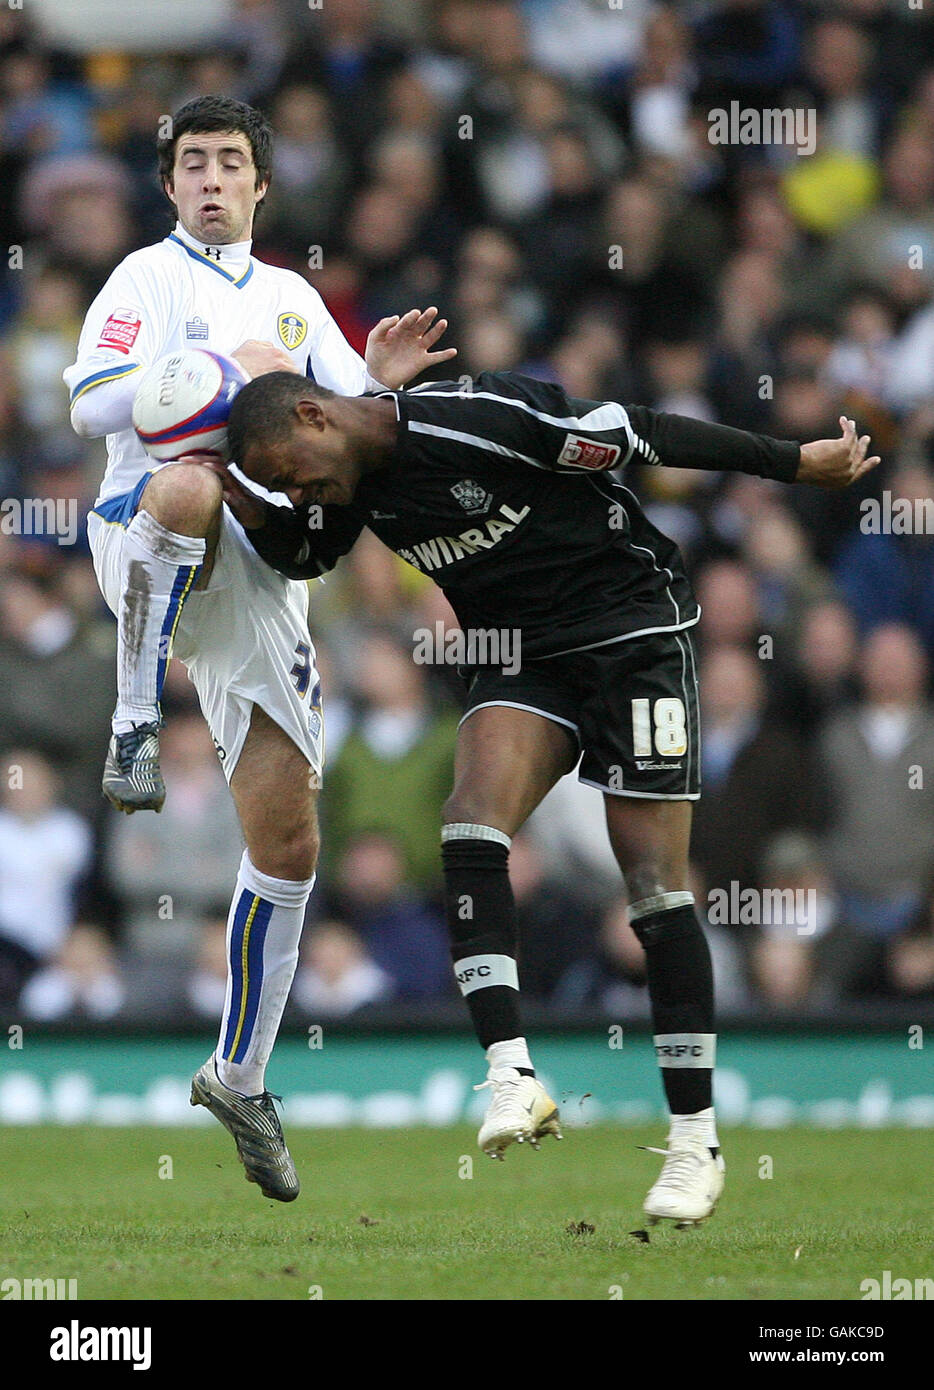 Tranmere Rovers Jennison Myrie-Williams and Leeds United's Mark De Vries during the League One match at Elland Road, Leeds. Stock Photo